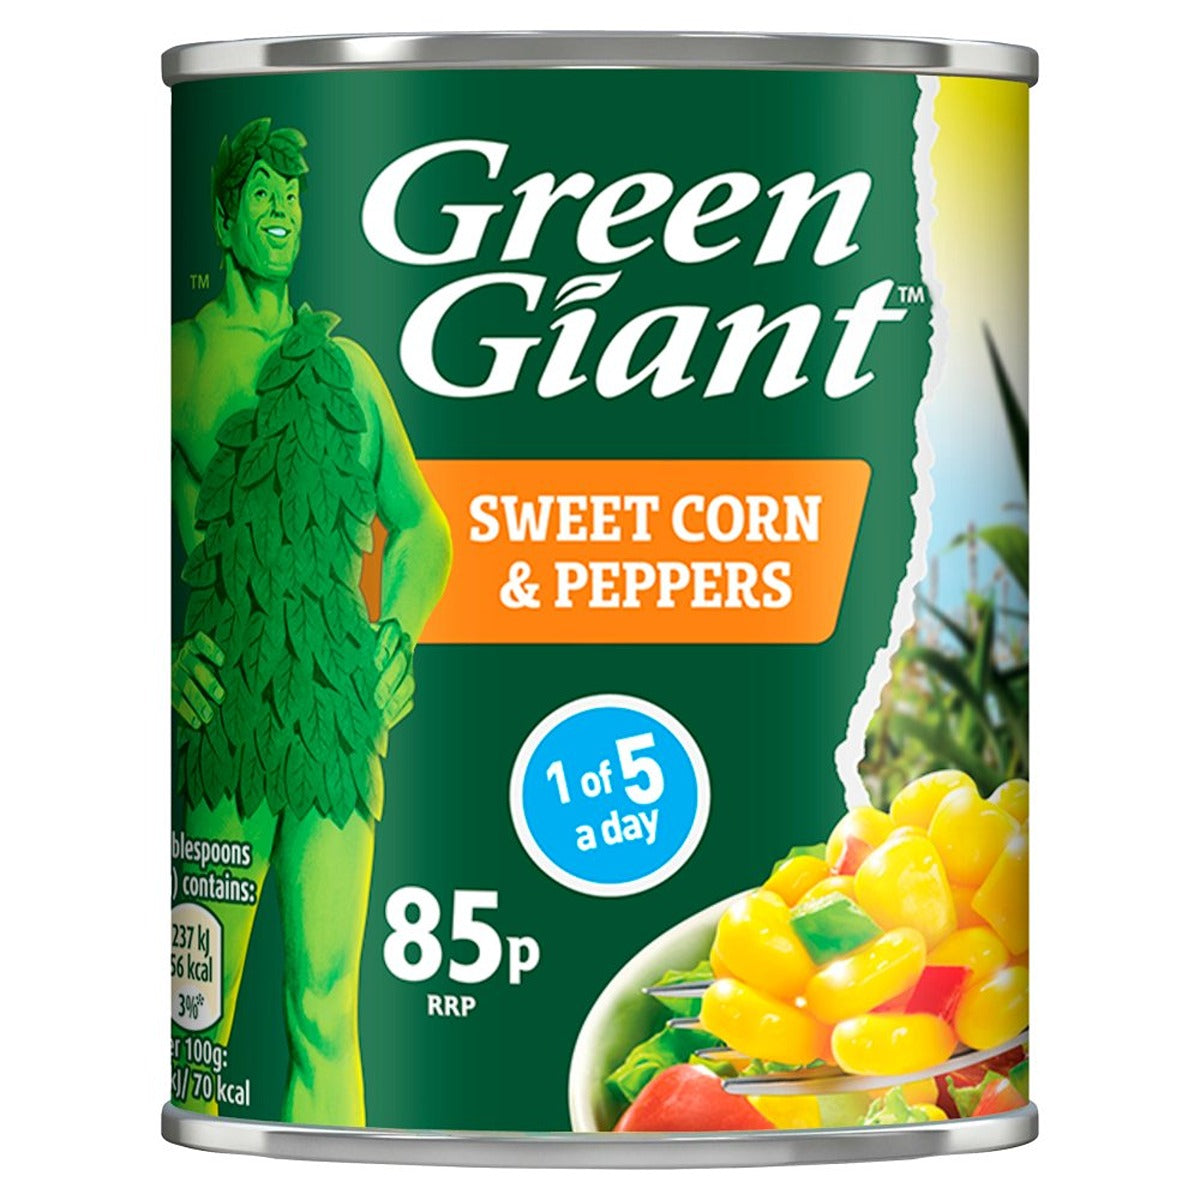 A can of Green Giant - Sweetcorn & Peppers - 198g.